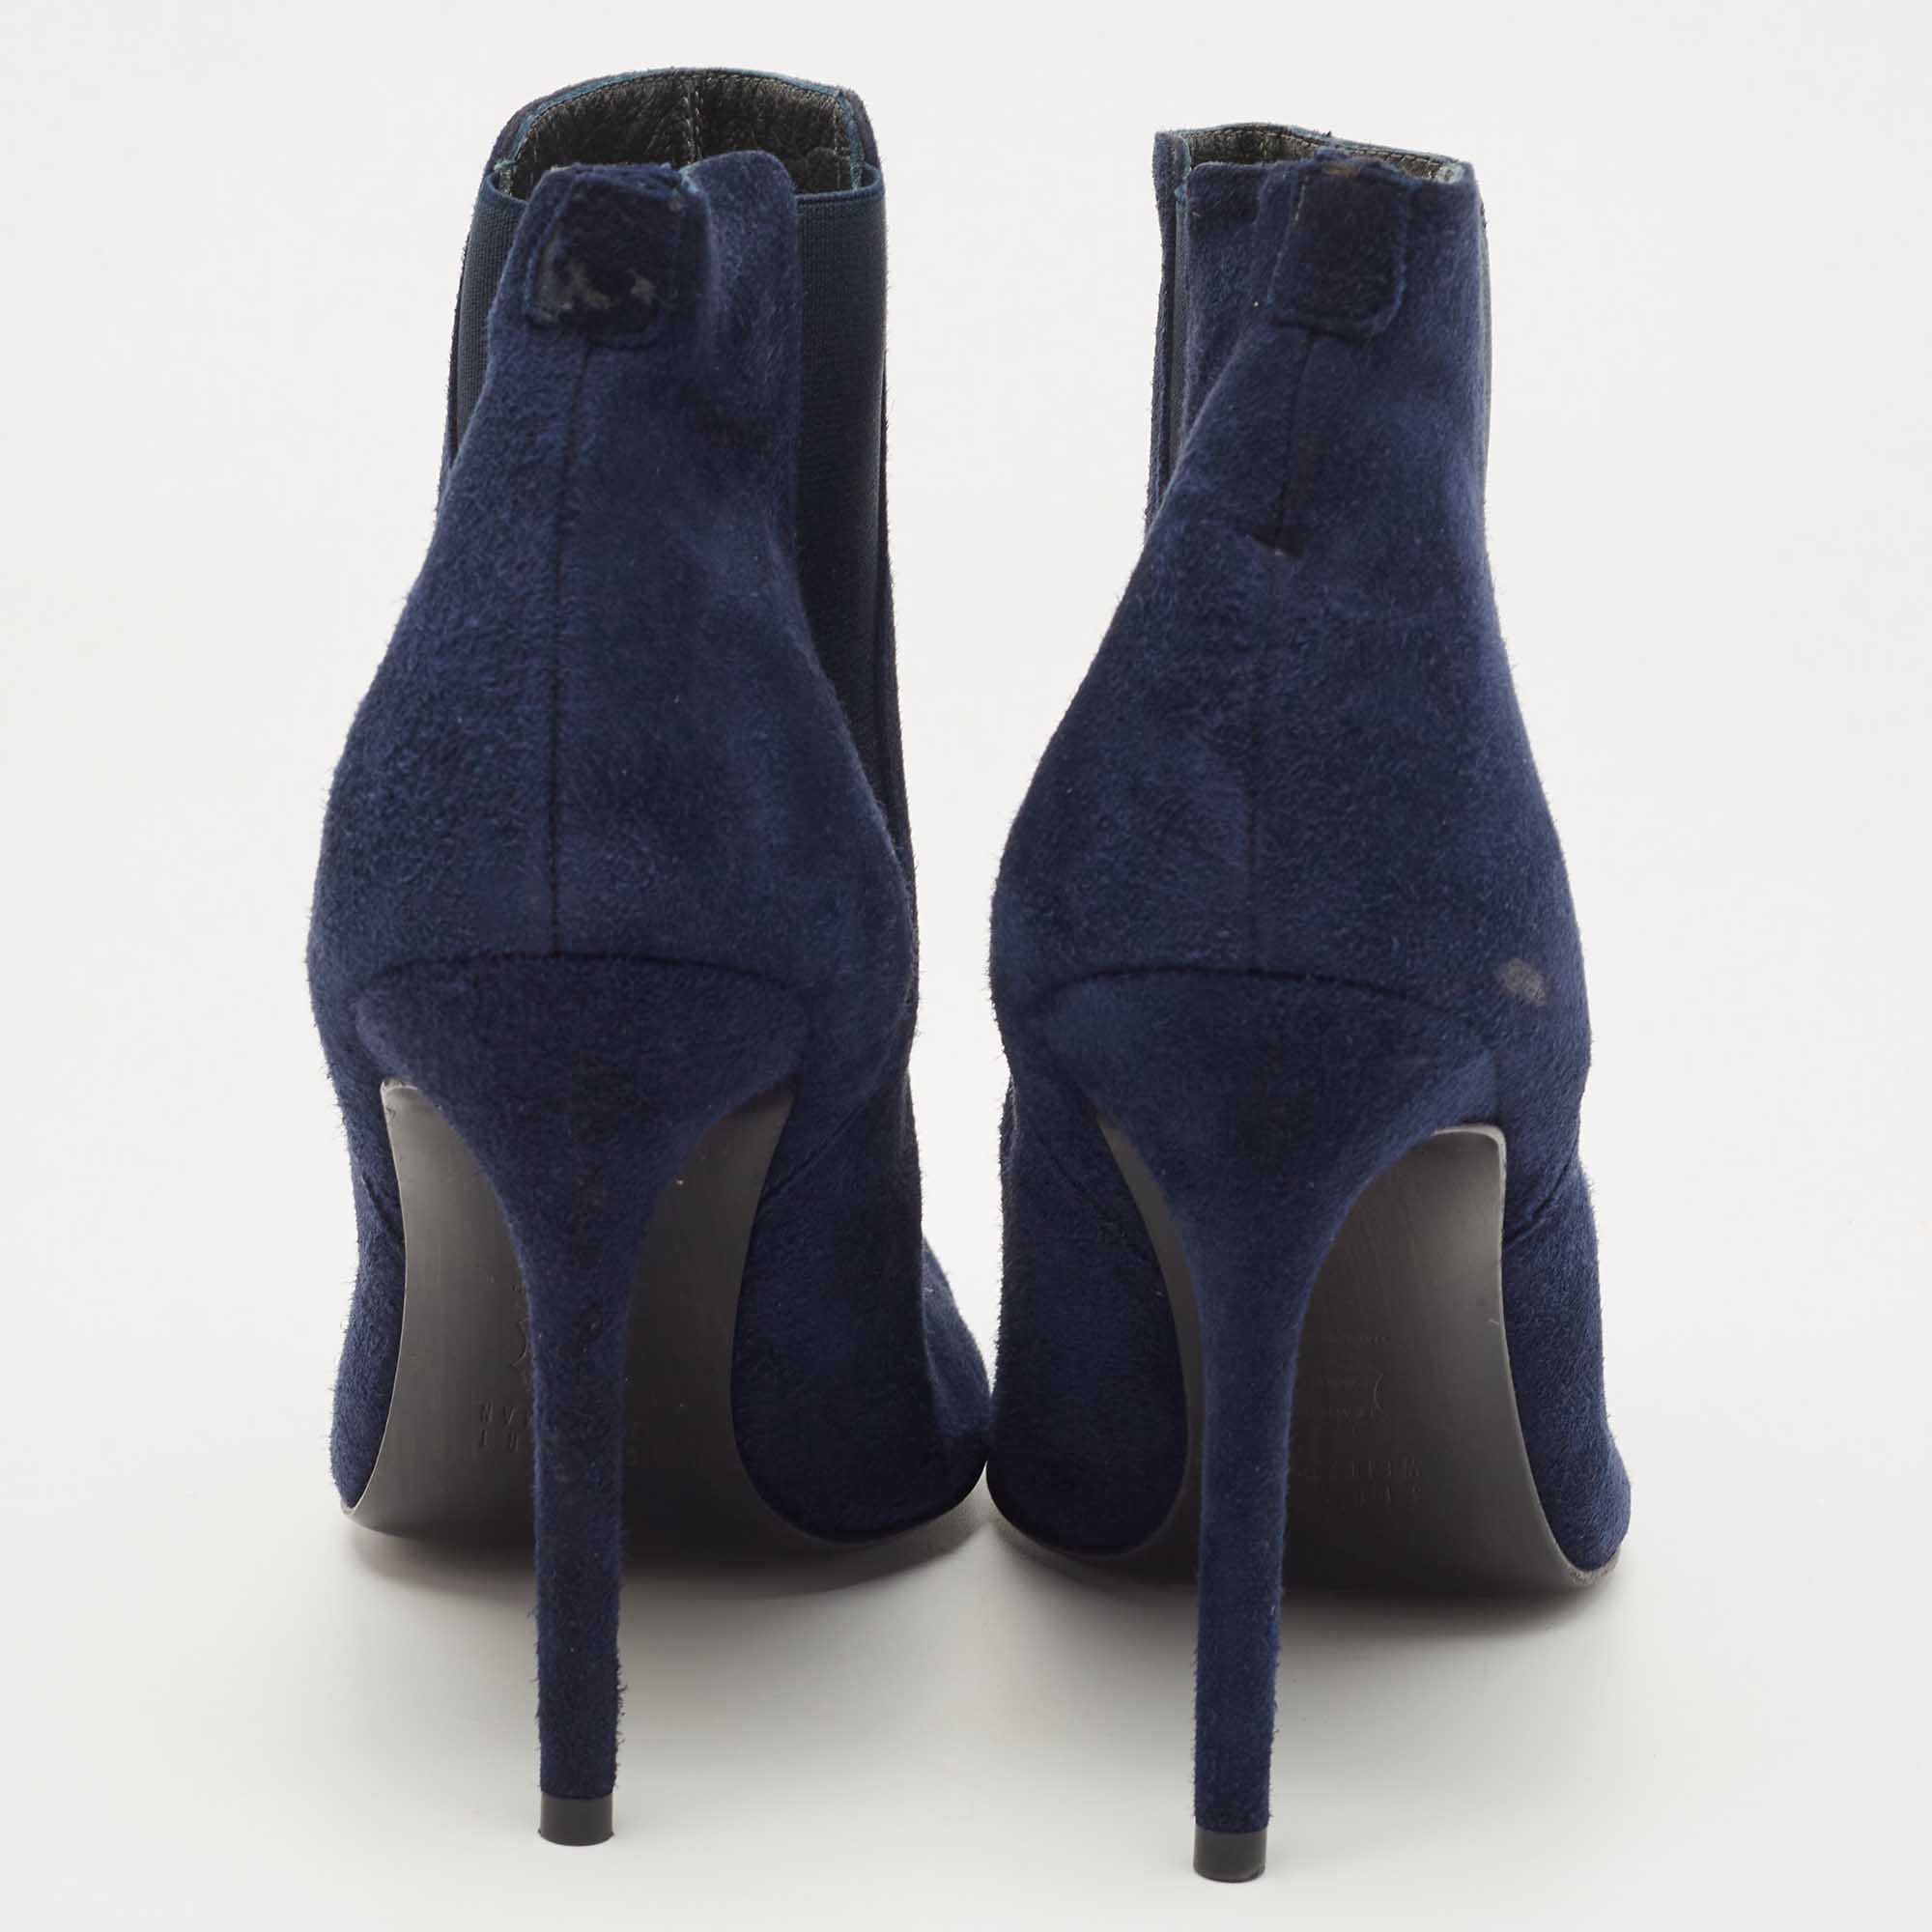 Stuart Weitzman Navy Blue Suede Pointed Toe Ankle Booties Size 40